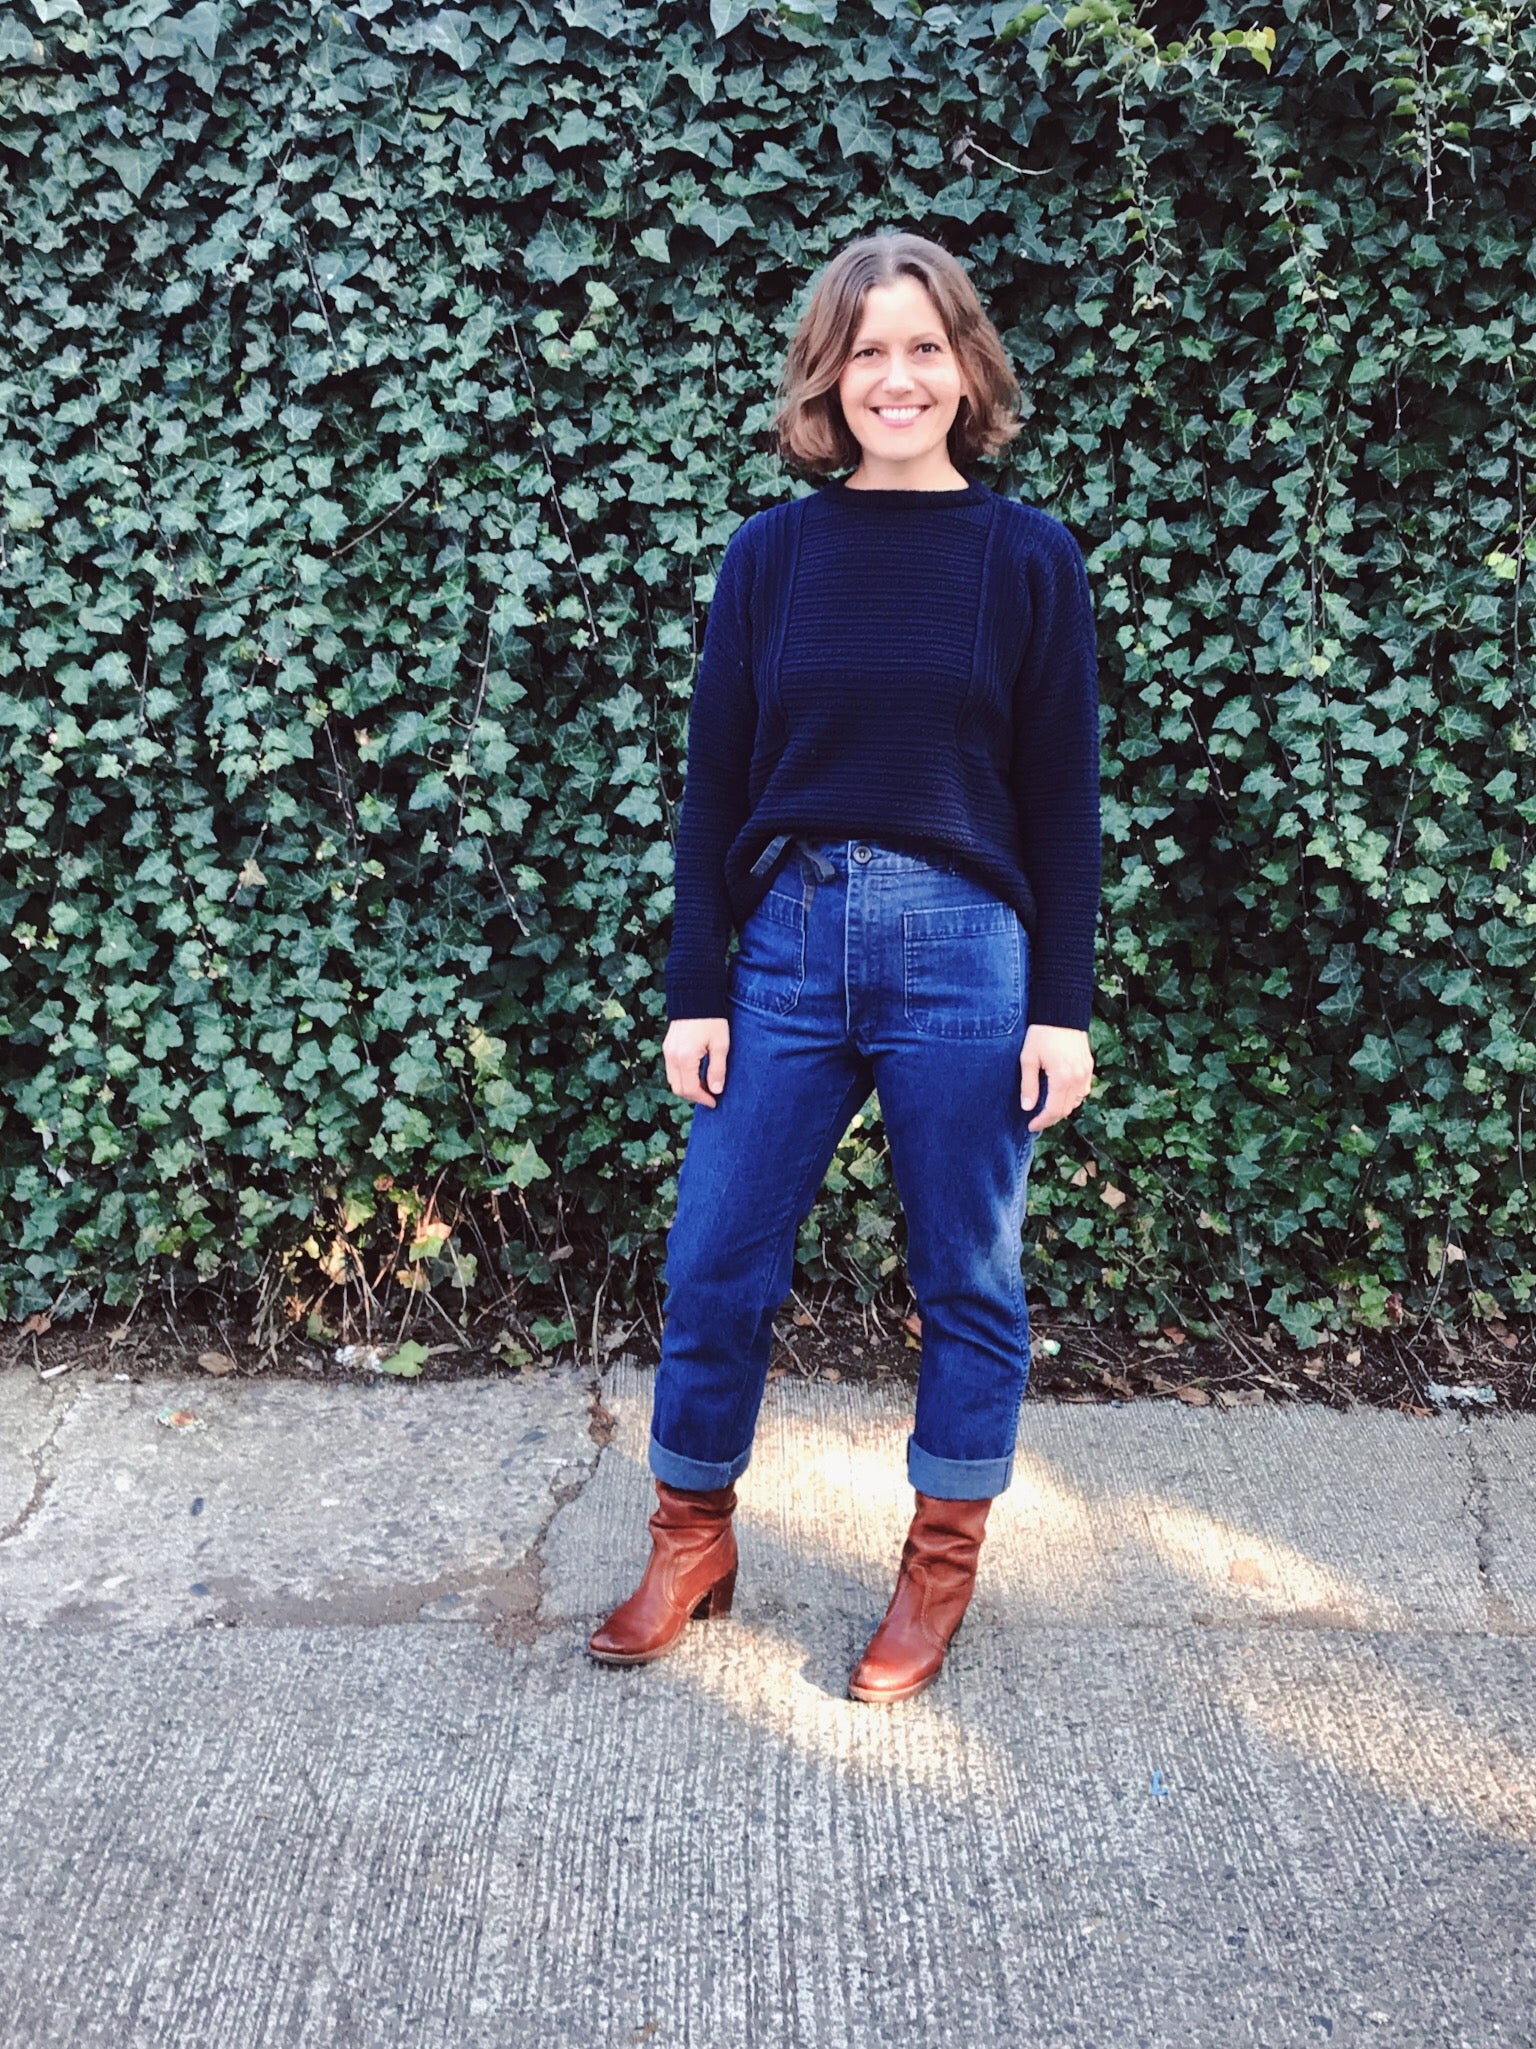 lis wearing her top down pull over weidlinger hand knit sweater